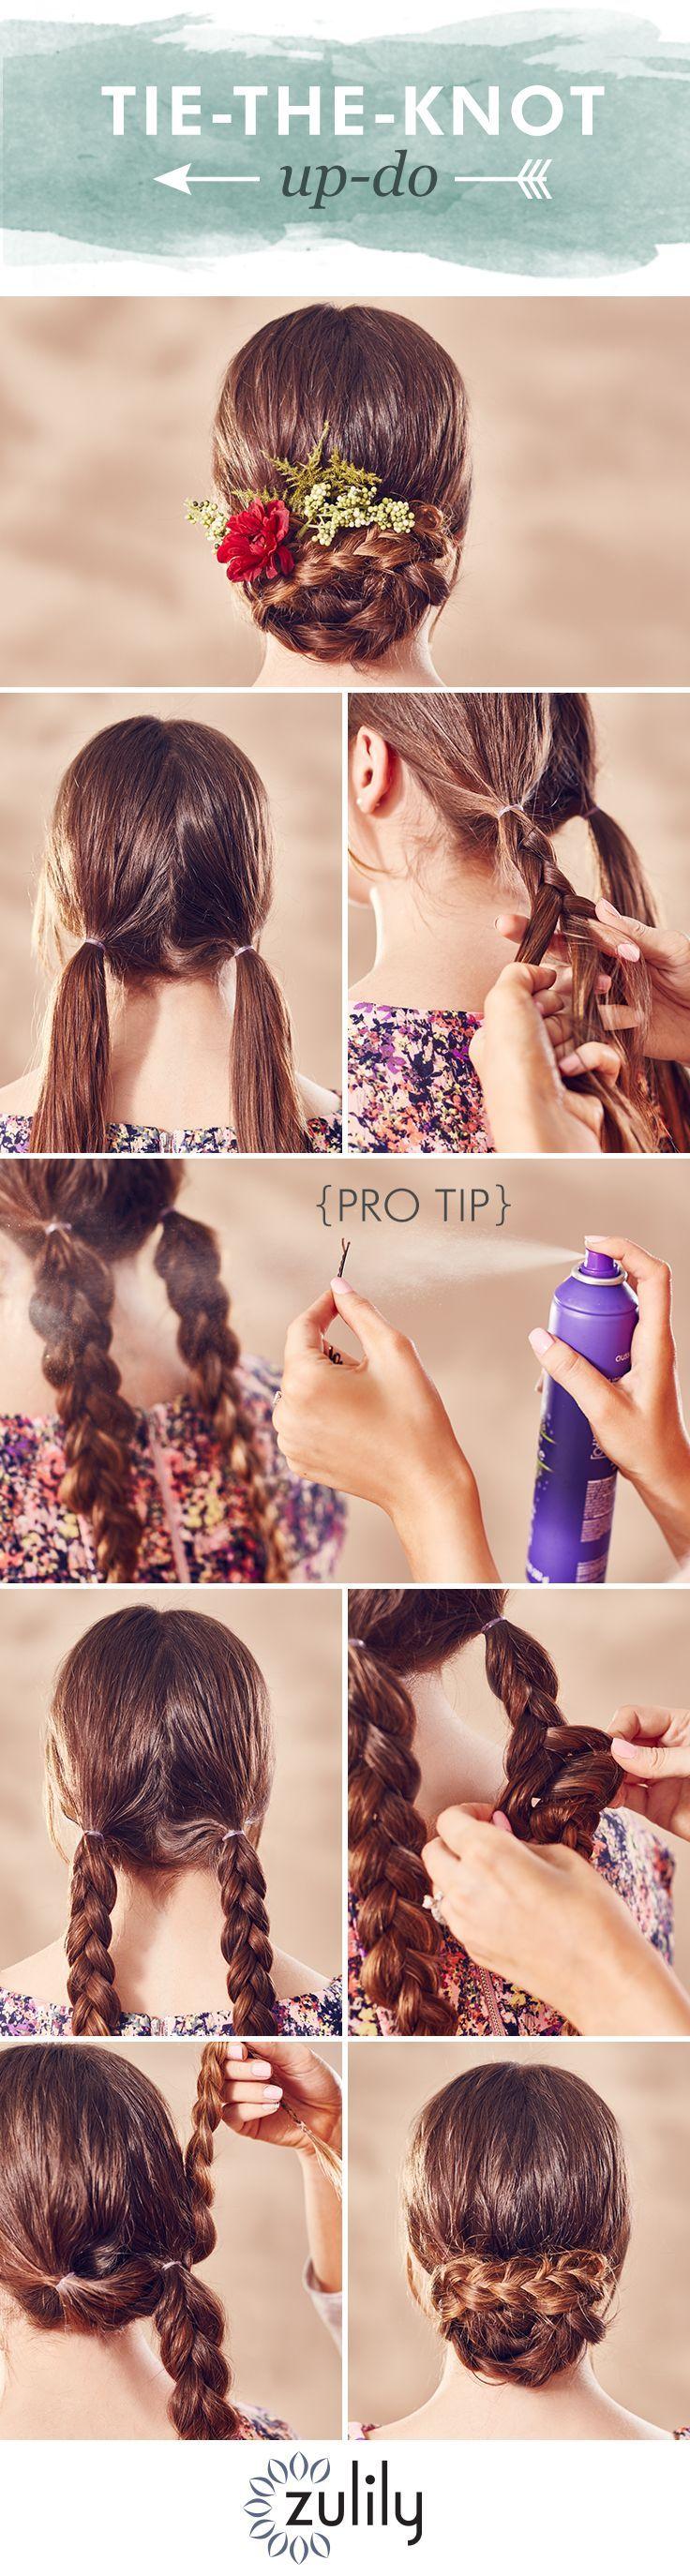 Wedding - Hair How-To: Tie The Knot With This Beautiful Braided Style